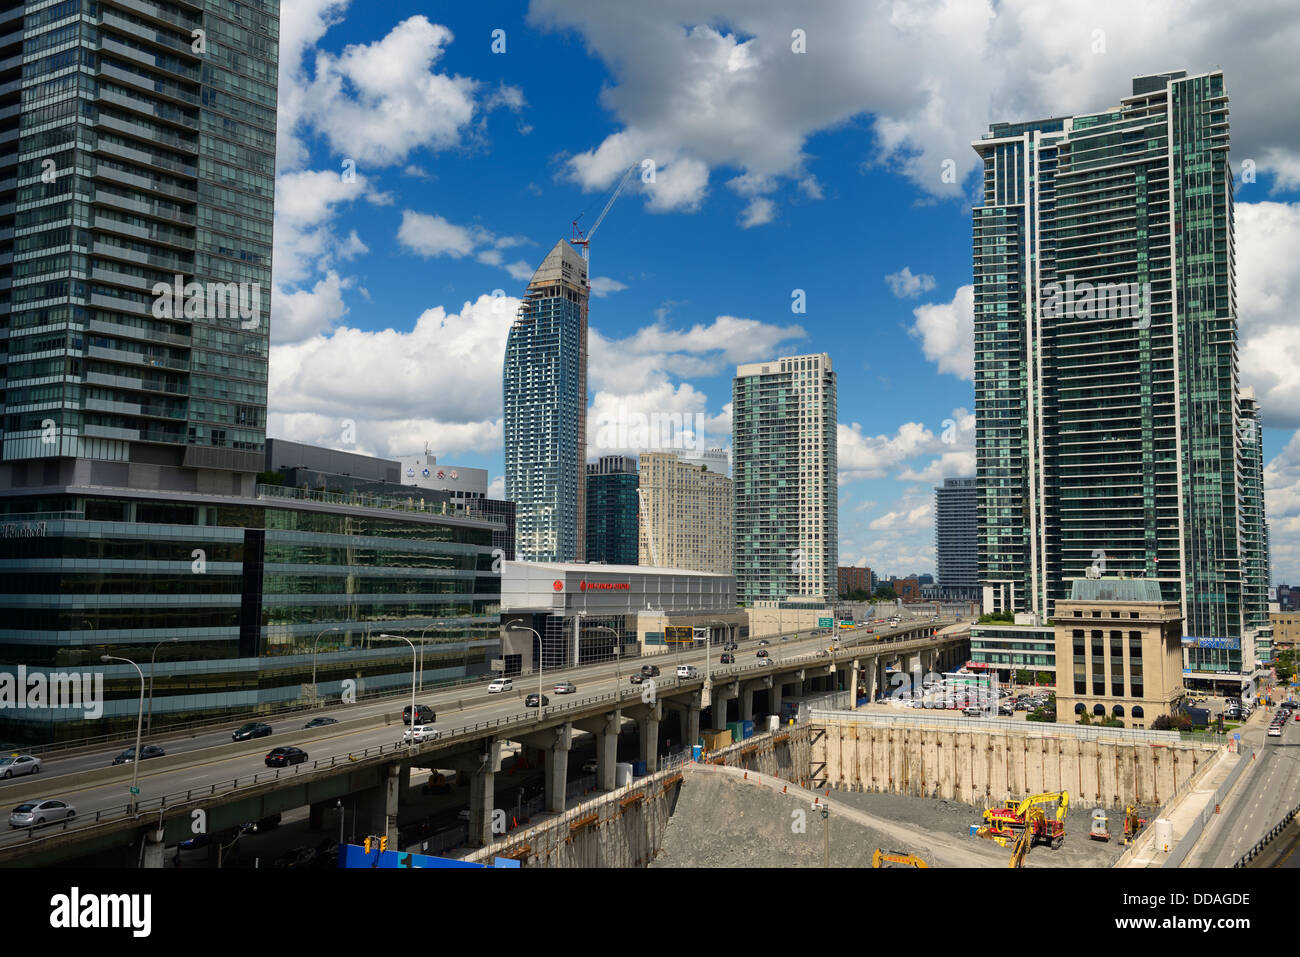 New construction along the Gardiner Expressway downtown Toronto including the L Tower and Air Canada Centre Stock Photo